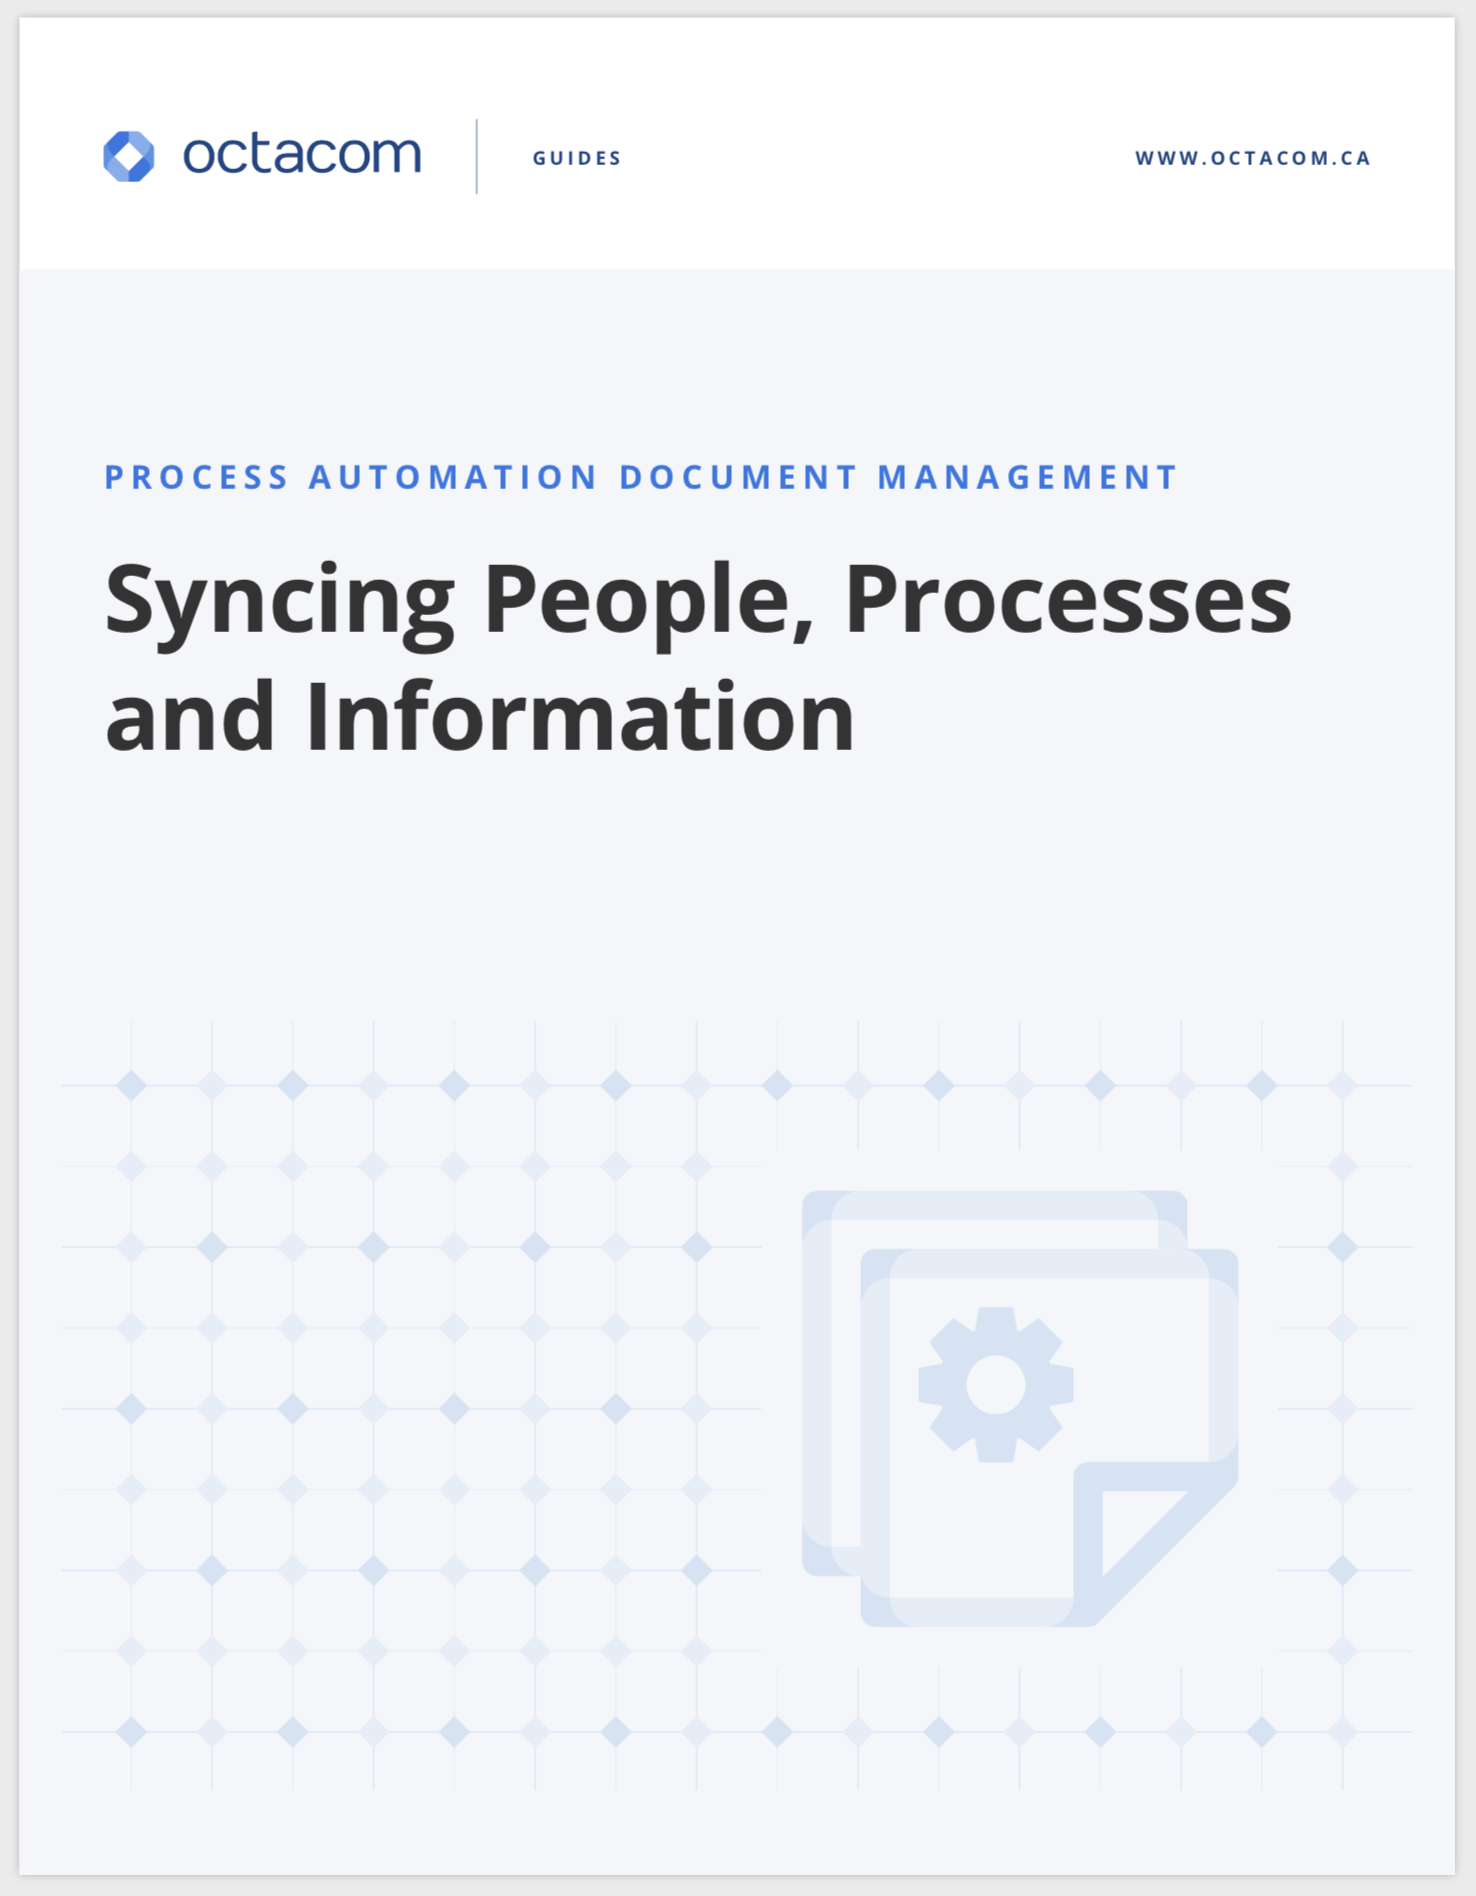 Syncing People, Process and Information with Process Automation and Document Management booklet